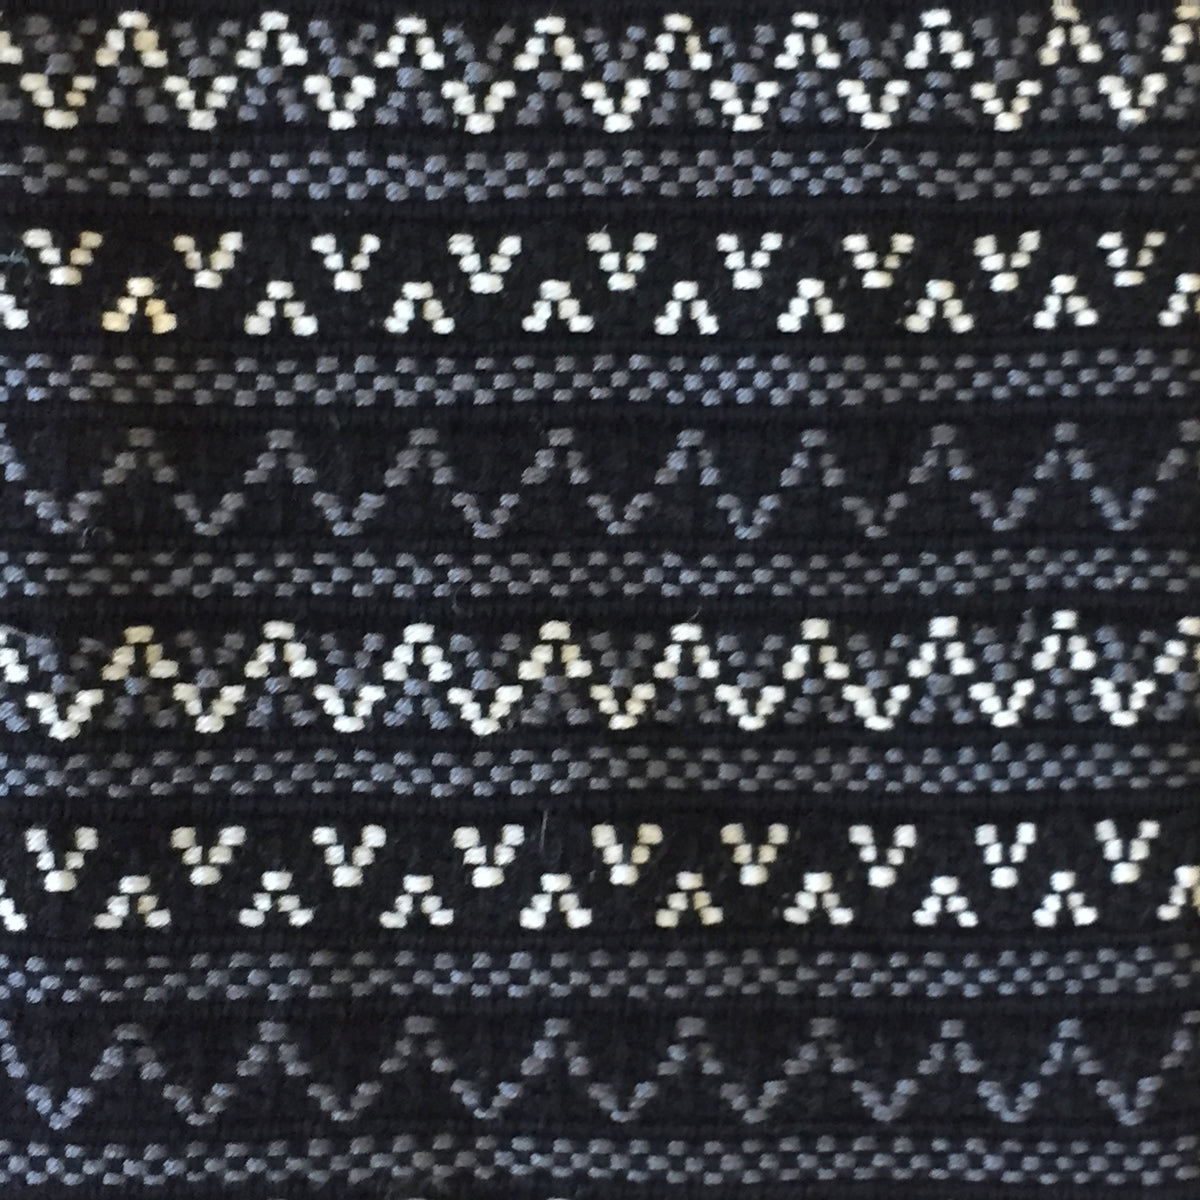 handwoven brocade fabric black and white